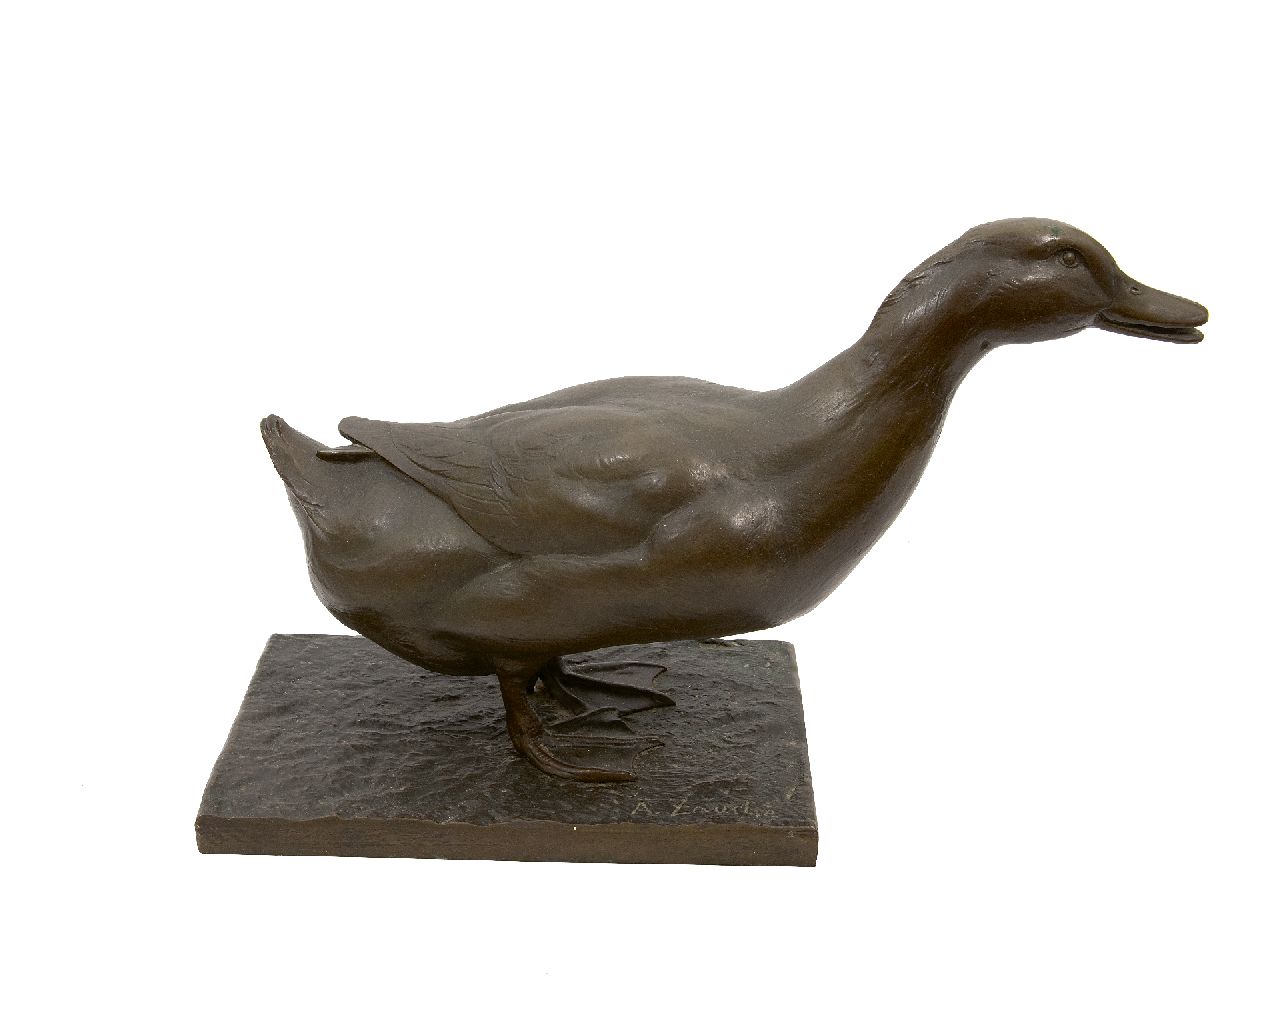 Zauche A.O.  | Arno 'Oswald' Zauche | Sculptures and objects offered for sale | Goose, bronze 39.0 x 59.0 cm, signed on the base